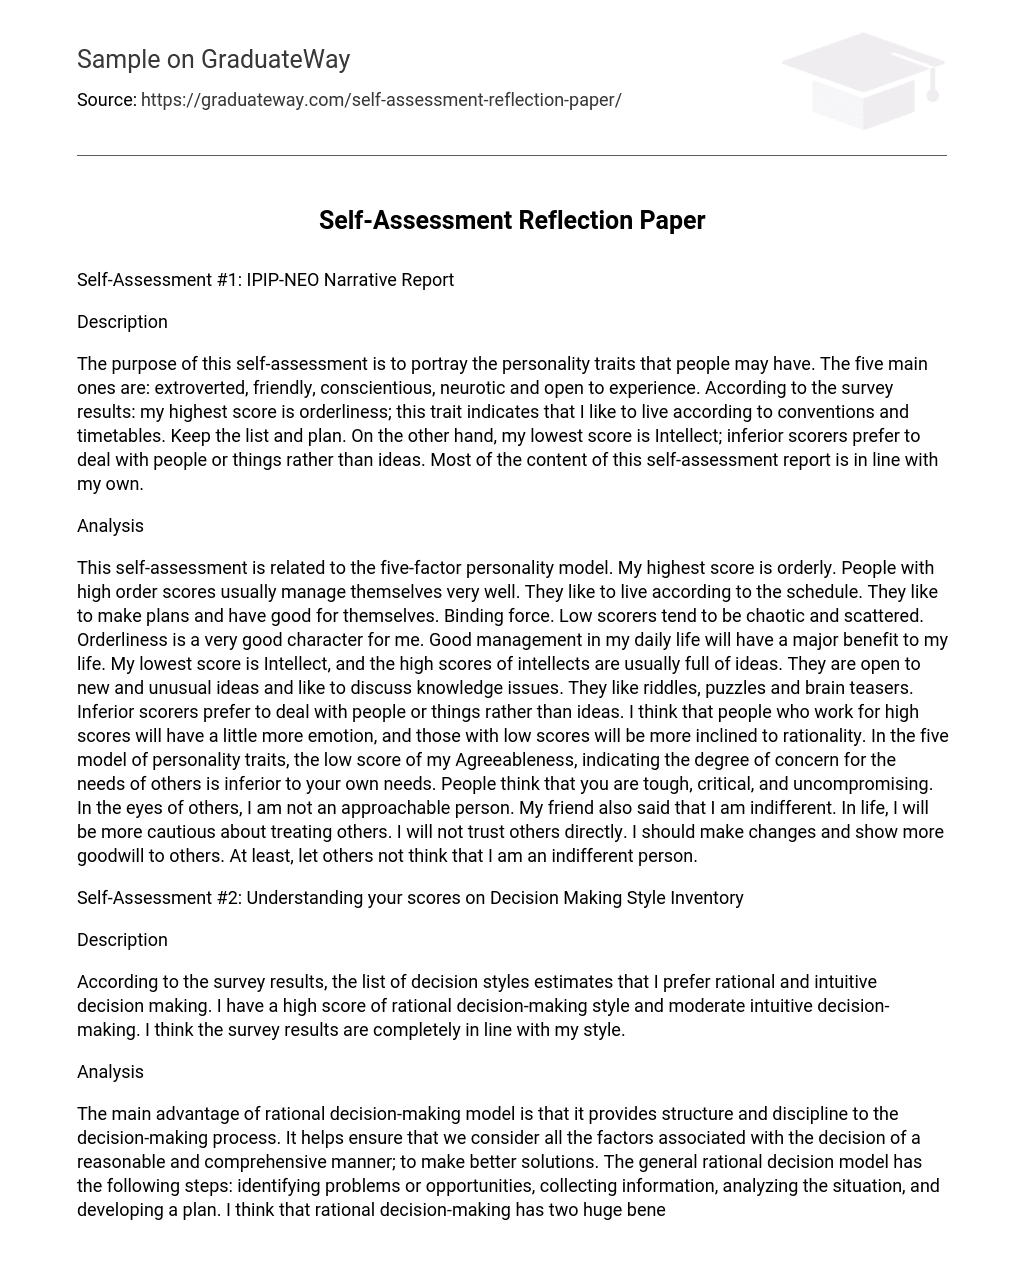 Self-Assessment Reflection Paper